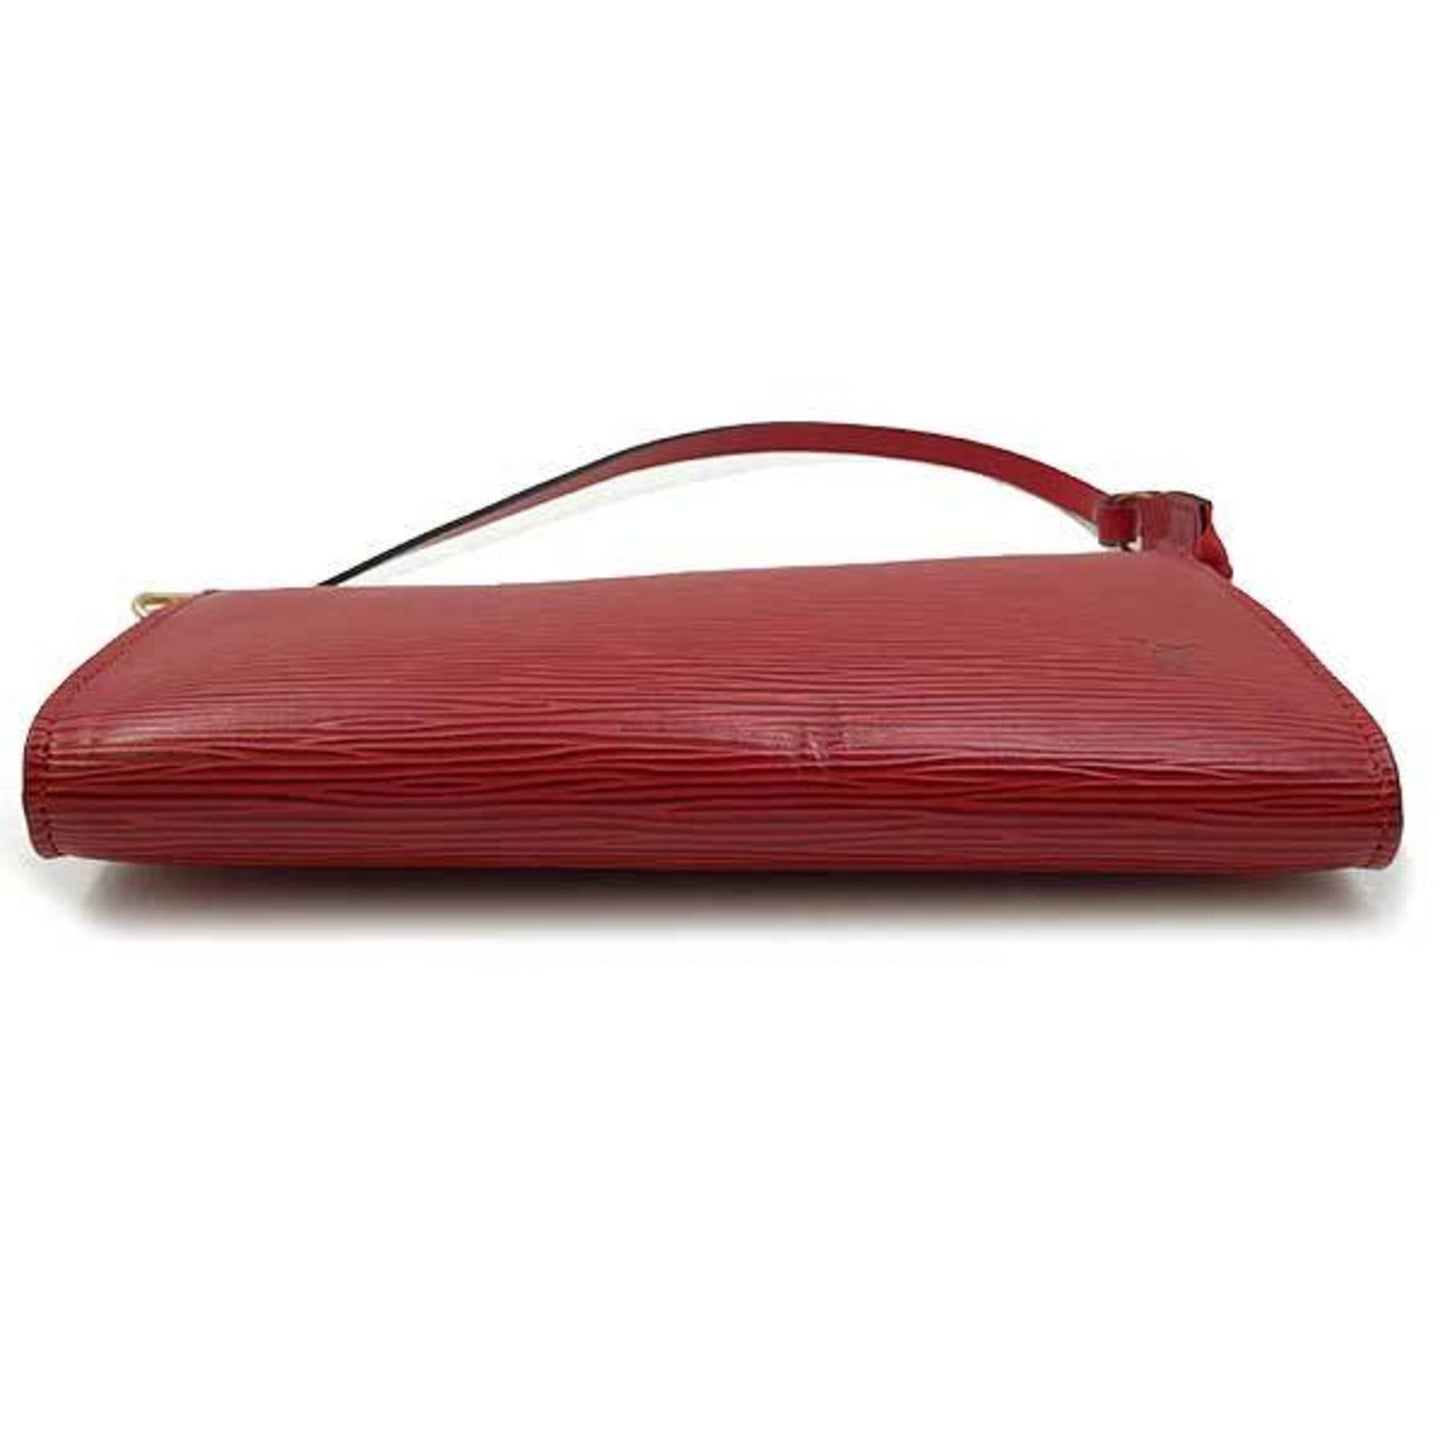 Louis Vuitton Women's Epi Leather Clutch Bag with Serial Number - Excellent Condition in Red